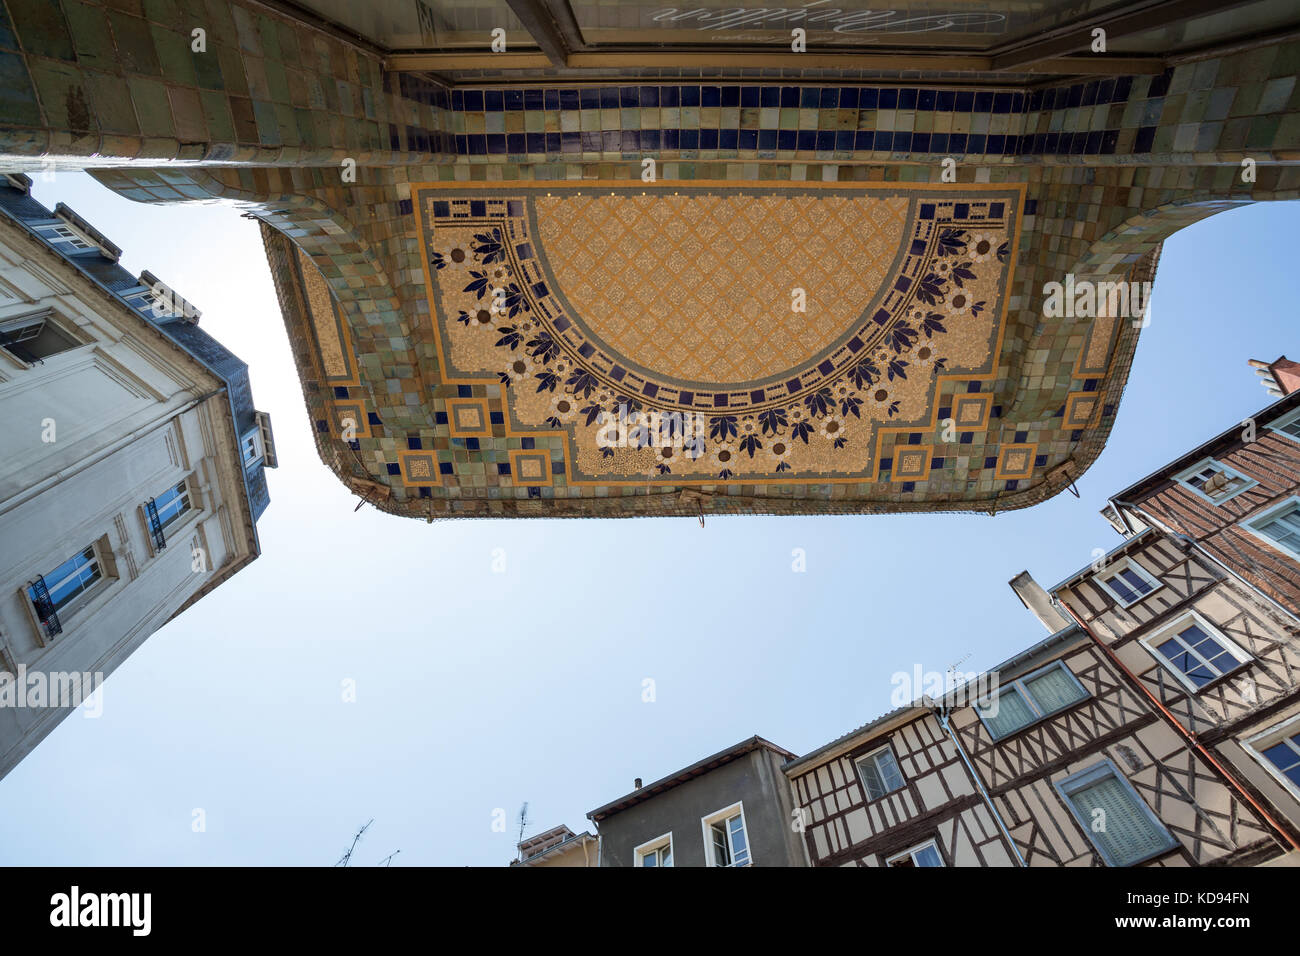 LIMOGES, LIMOUSIN, FRANCE - JULY 2, 2017: A look up at the entrance to the pavillon du Verdurier to the mosaic roof. Stock Photo